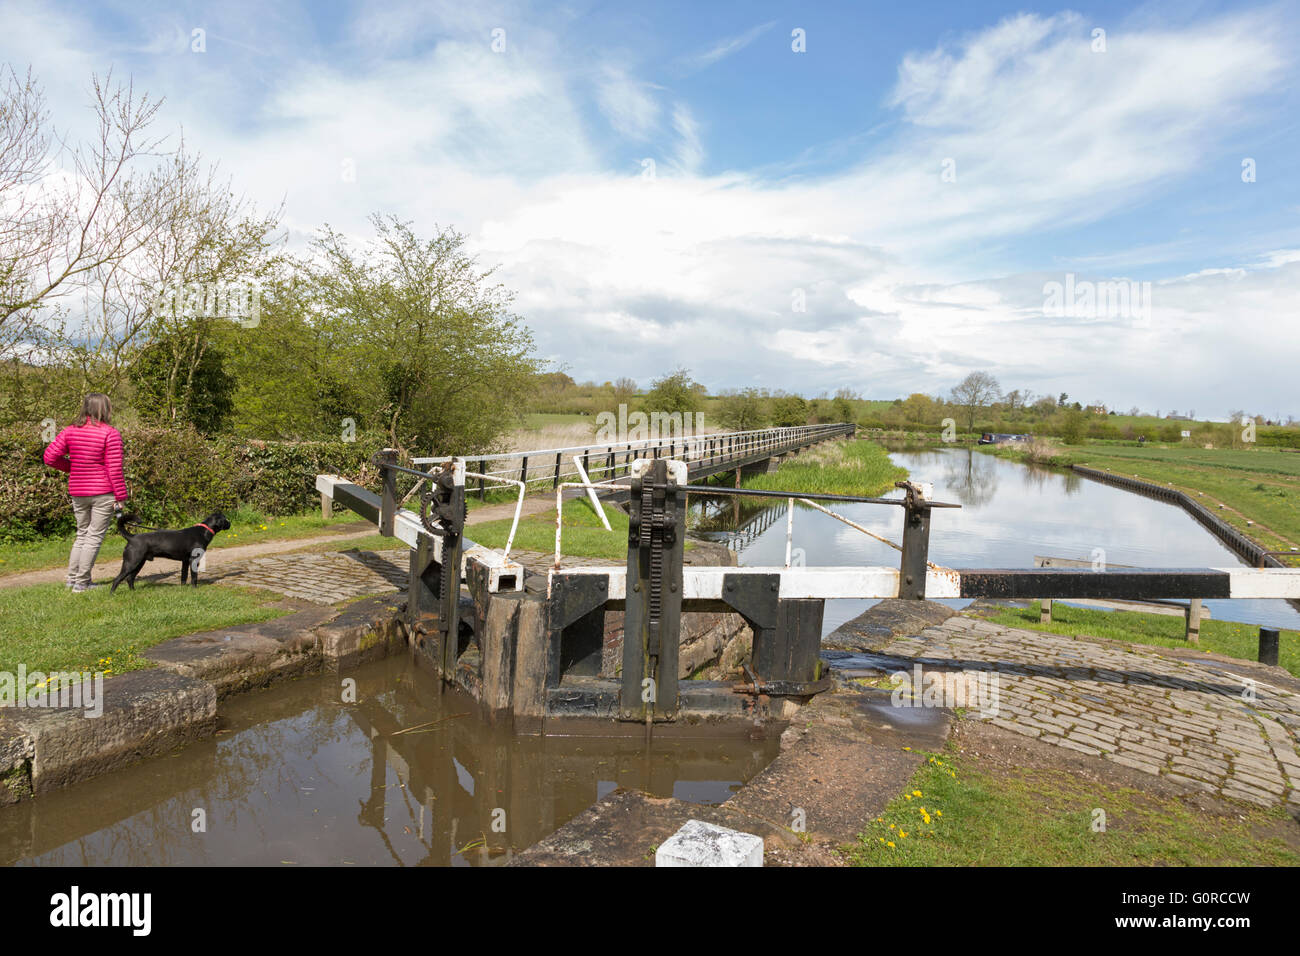 Alrewas lock on the Trent and Mersey Canal near the village of Alrewas, Staffordshire, England, UK Stock Photo